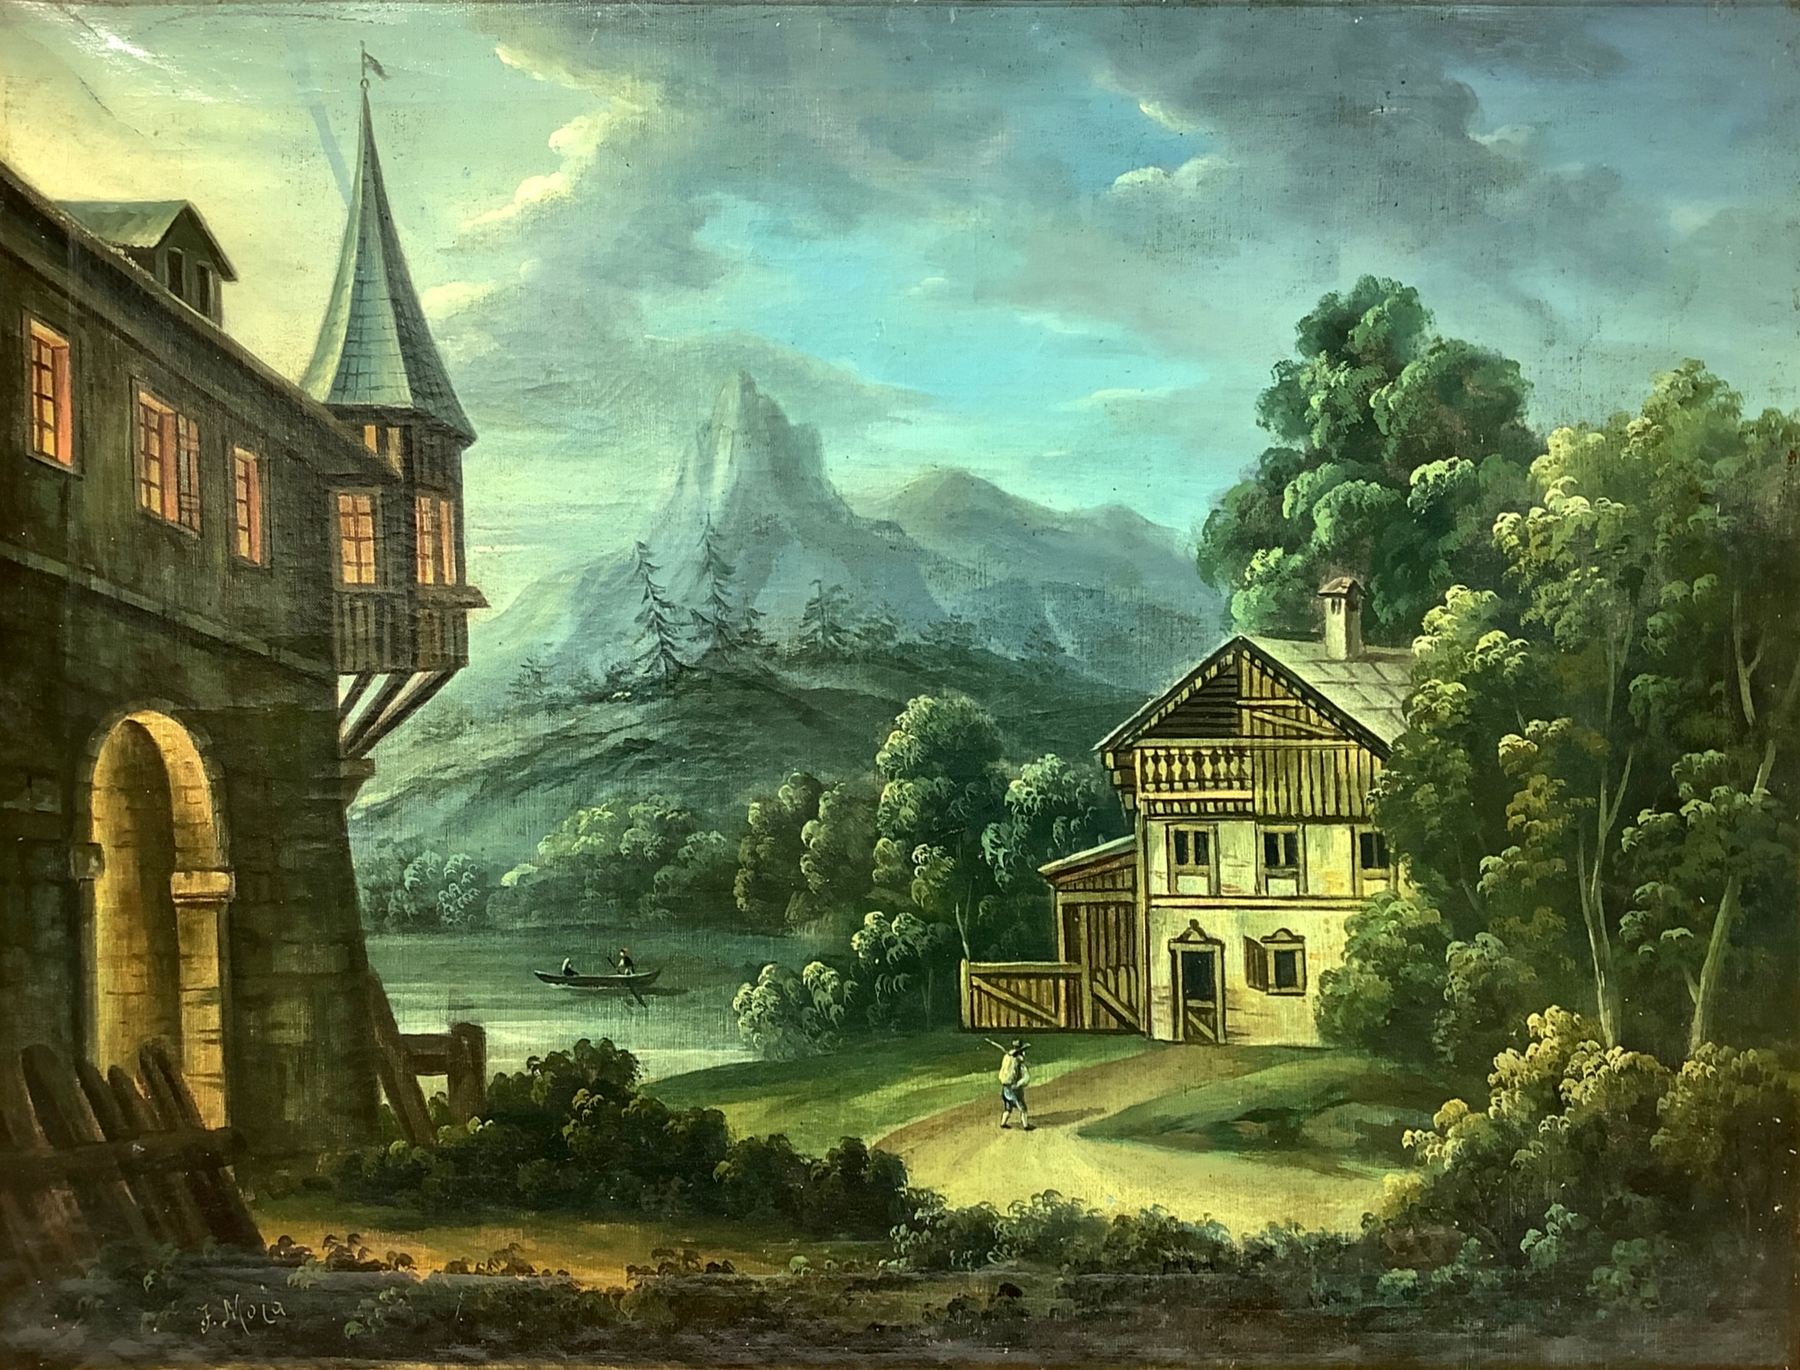 Oil painting on canvas depicting mountain landscape with lake and cottage, Federico Moja (Milano, 20